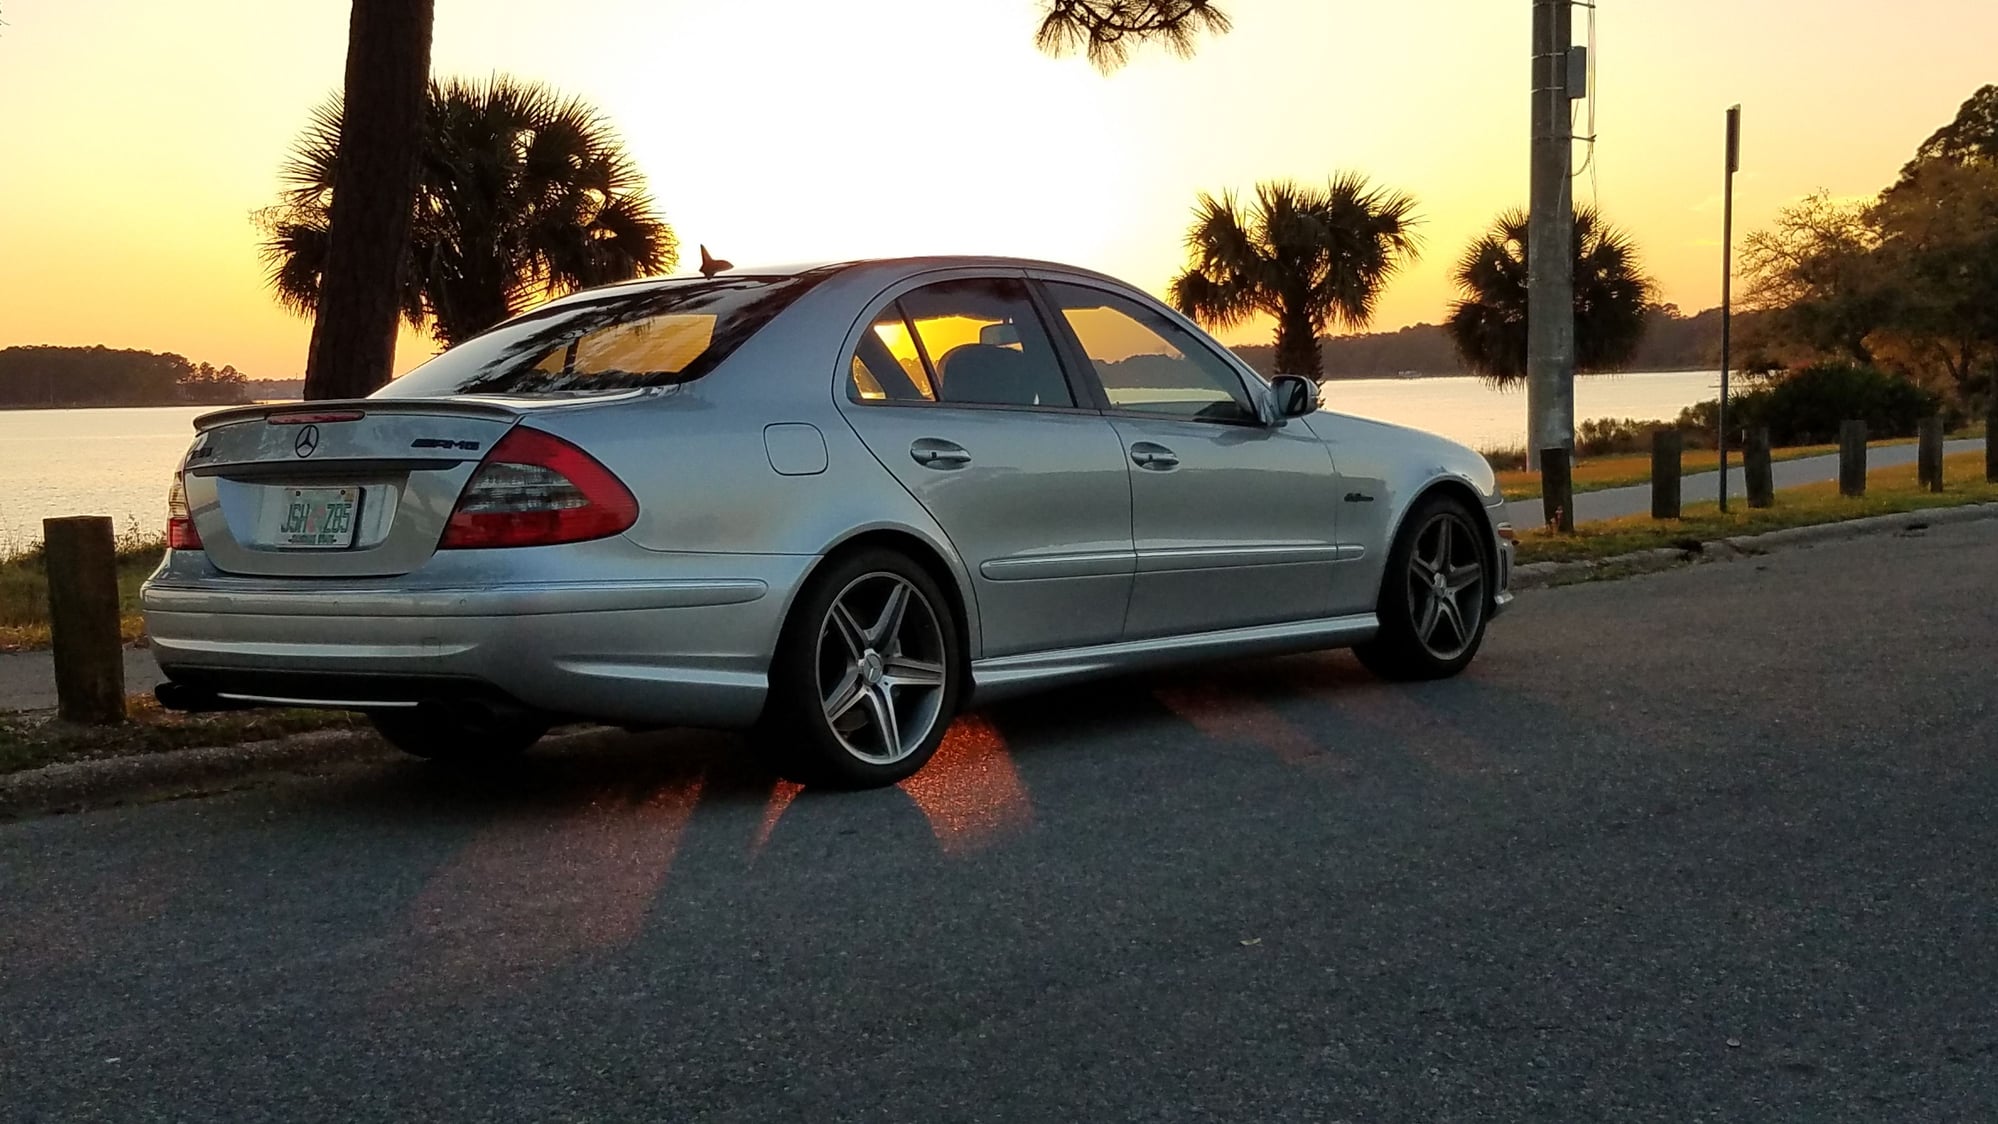 2008 Mercedes-Benz E63 AMG - 2008 Mercedes e63 AMG $14k - Used - VIN Can be sent if in - 122,300 Miles - 8 cyl - 2WD - Automatic - Sedan - Silver - Pensacola, FL 32507, United States